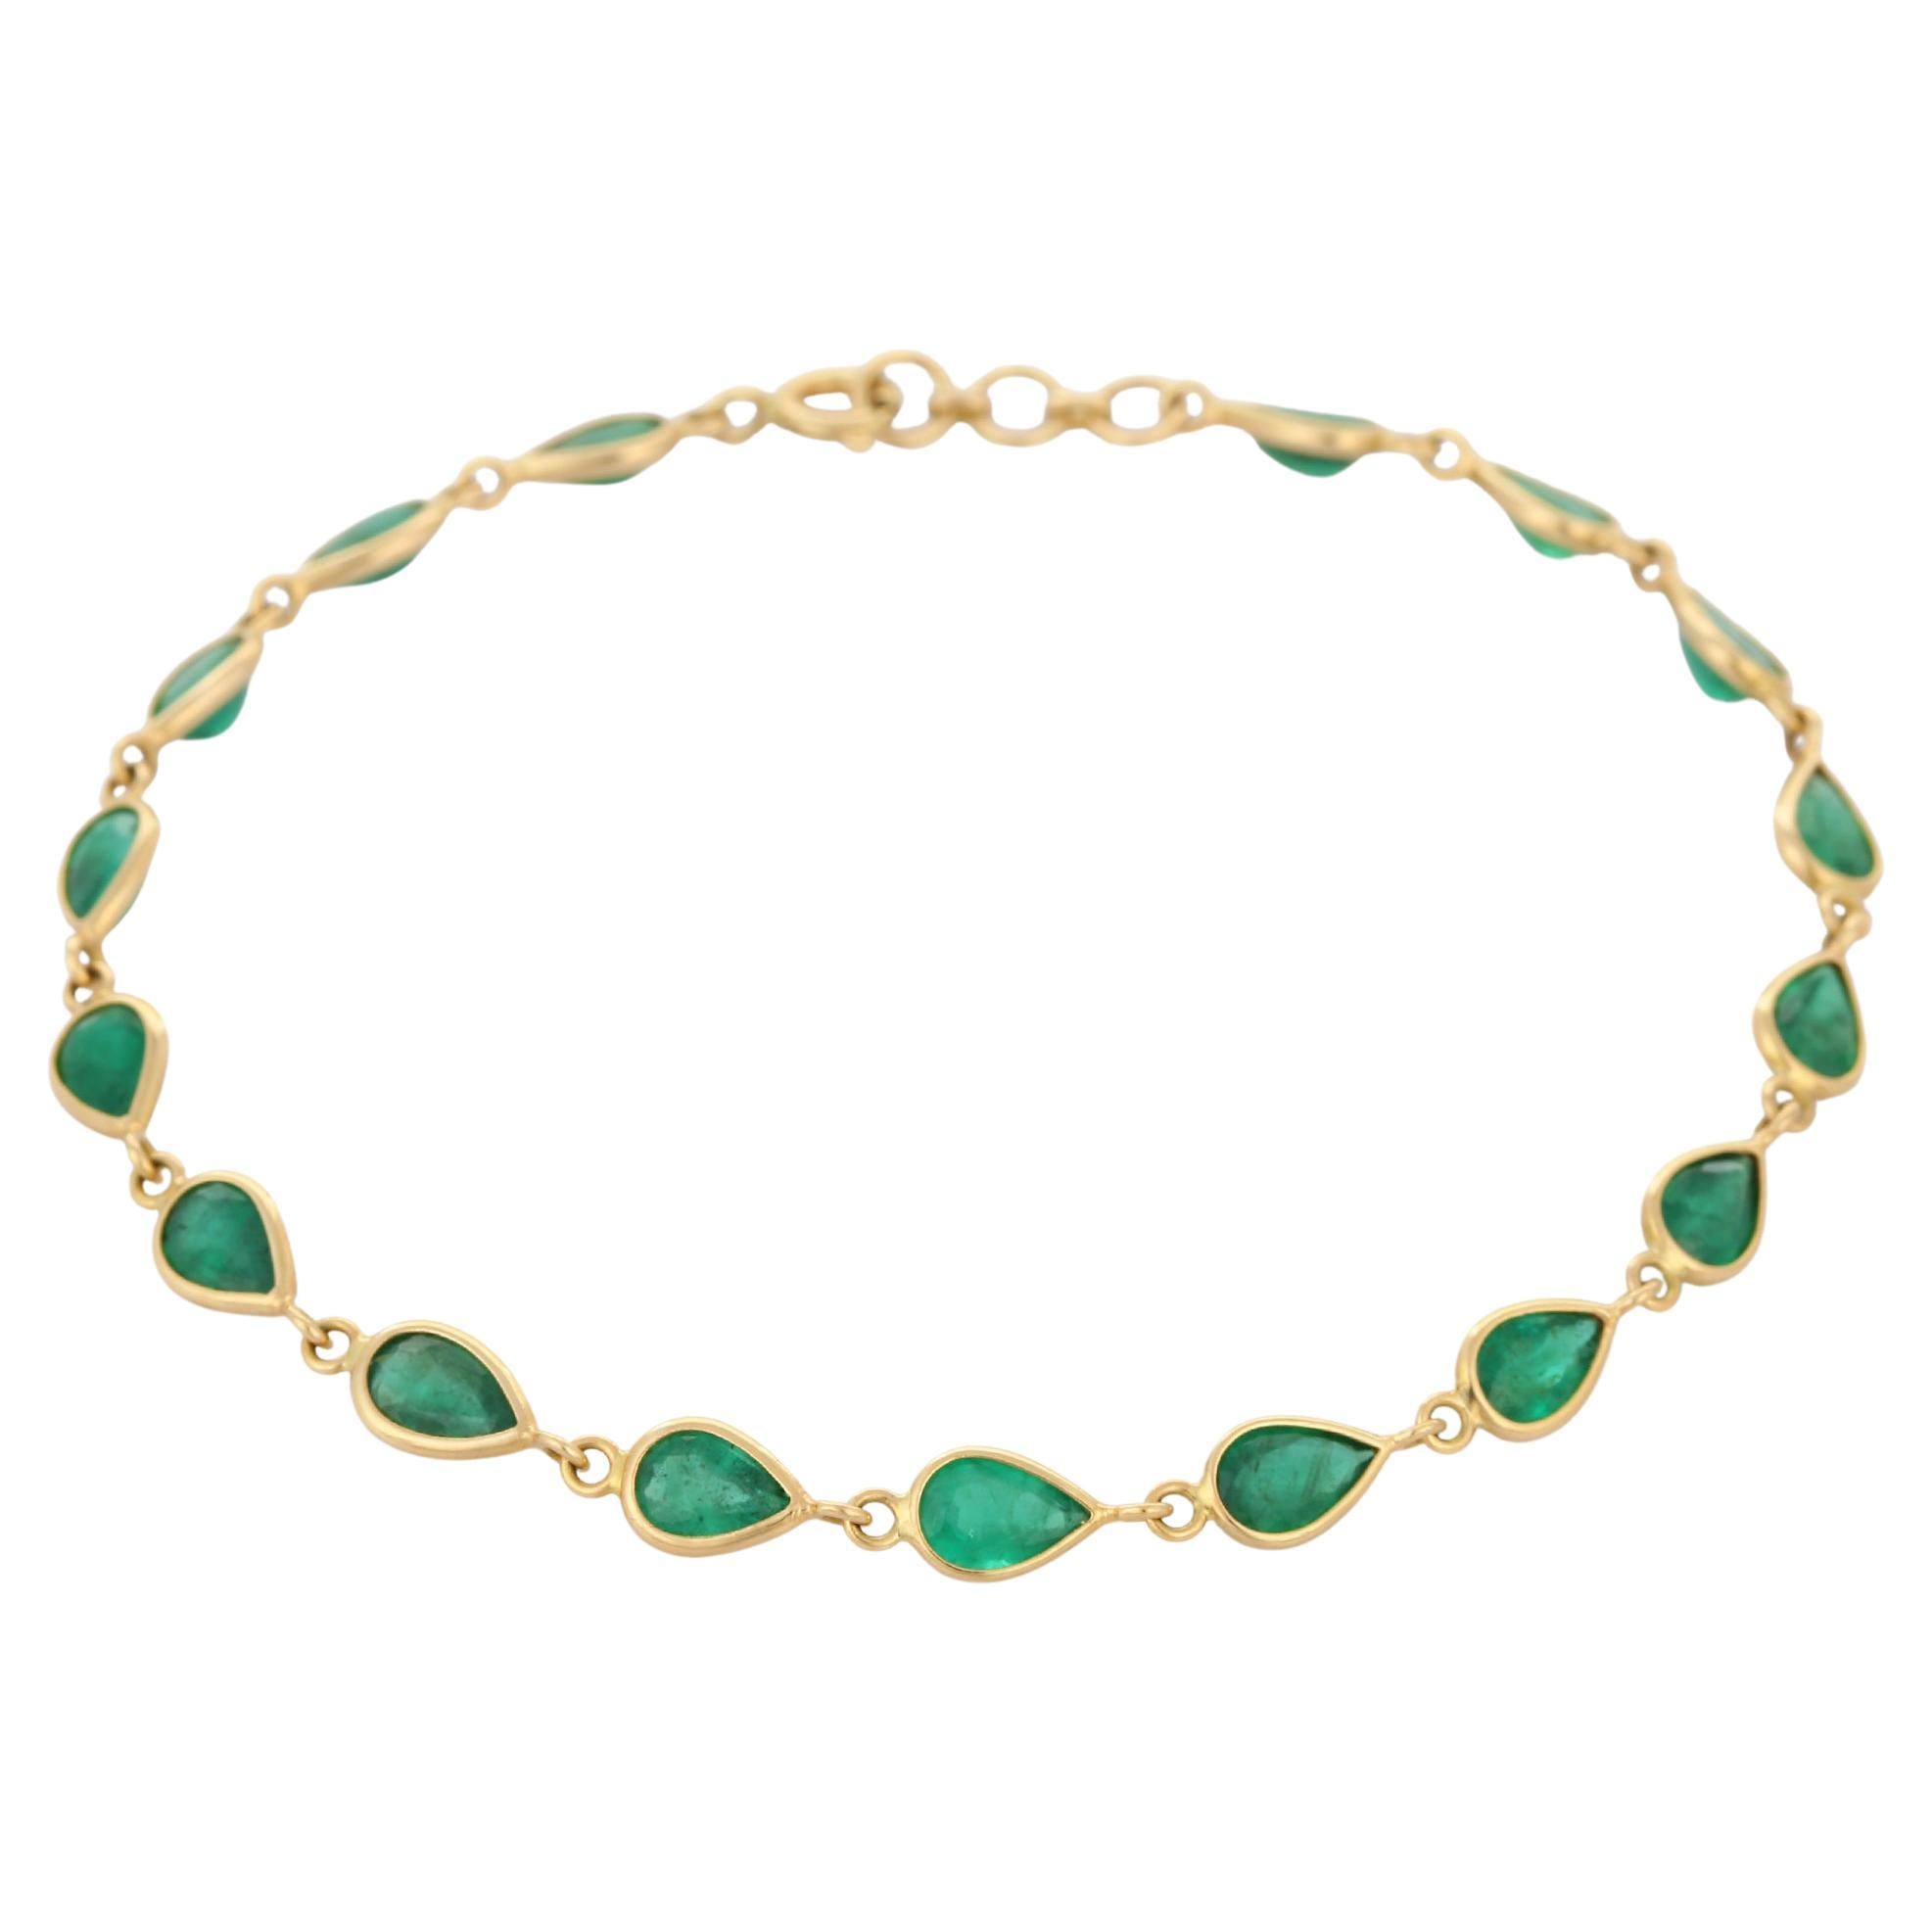 Exquisite 5.75 ct Pear Cut Emerald Chain Bracelet Inlaid in 18K Yellow Gold